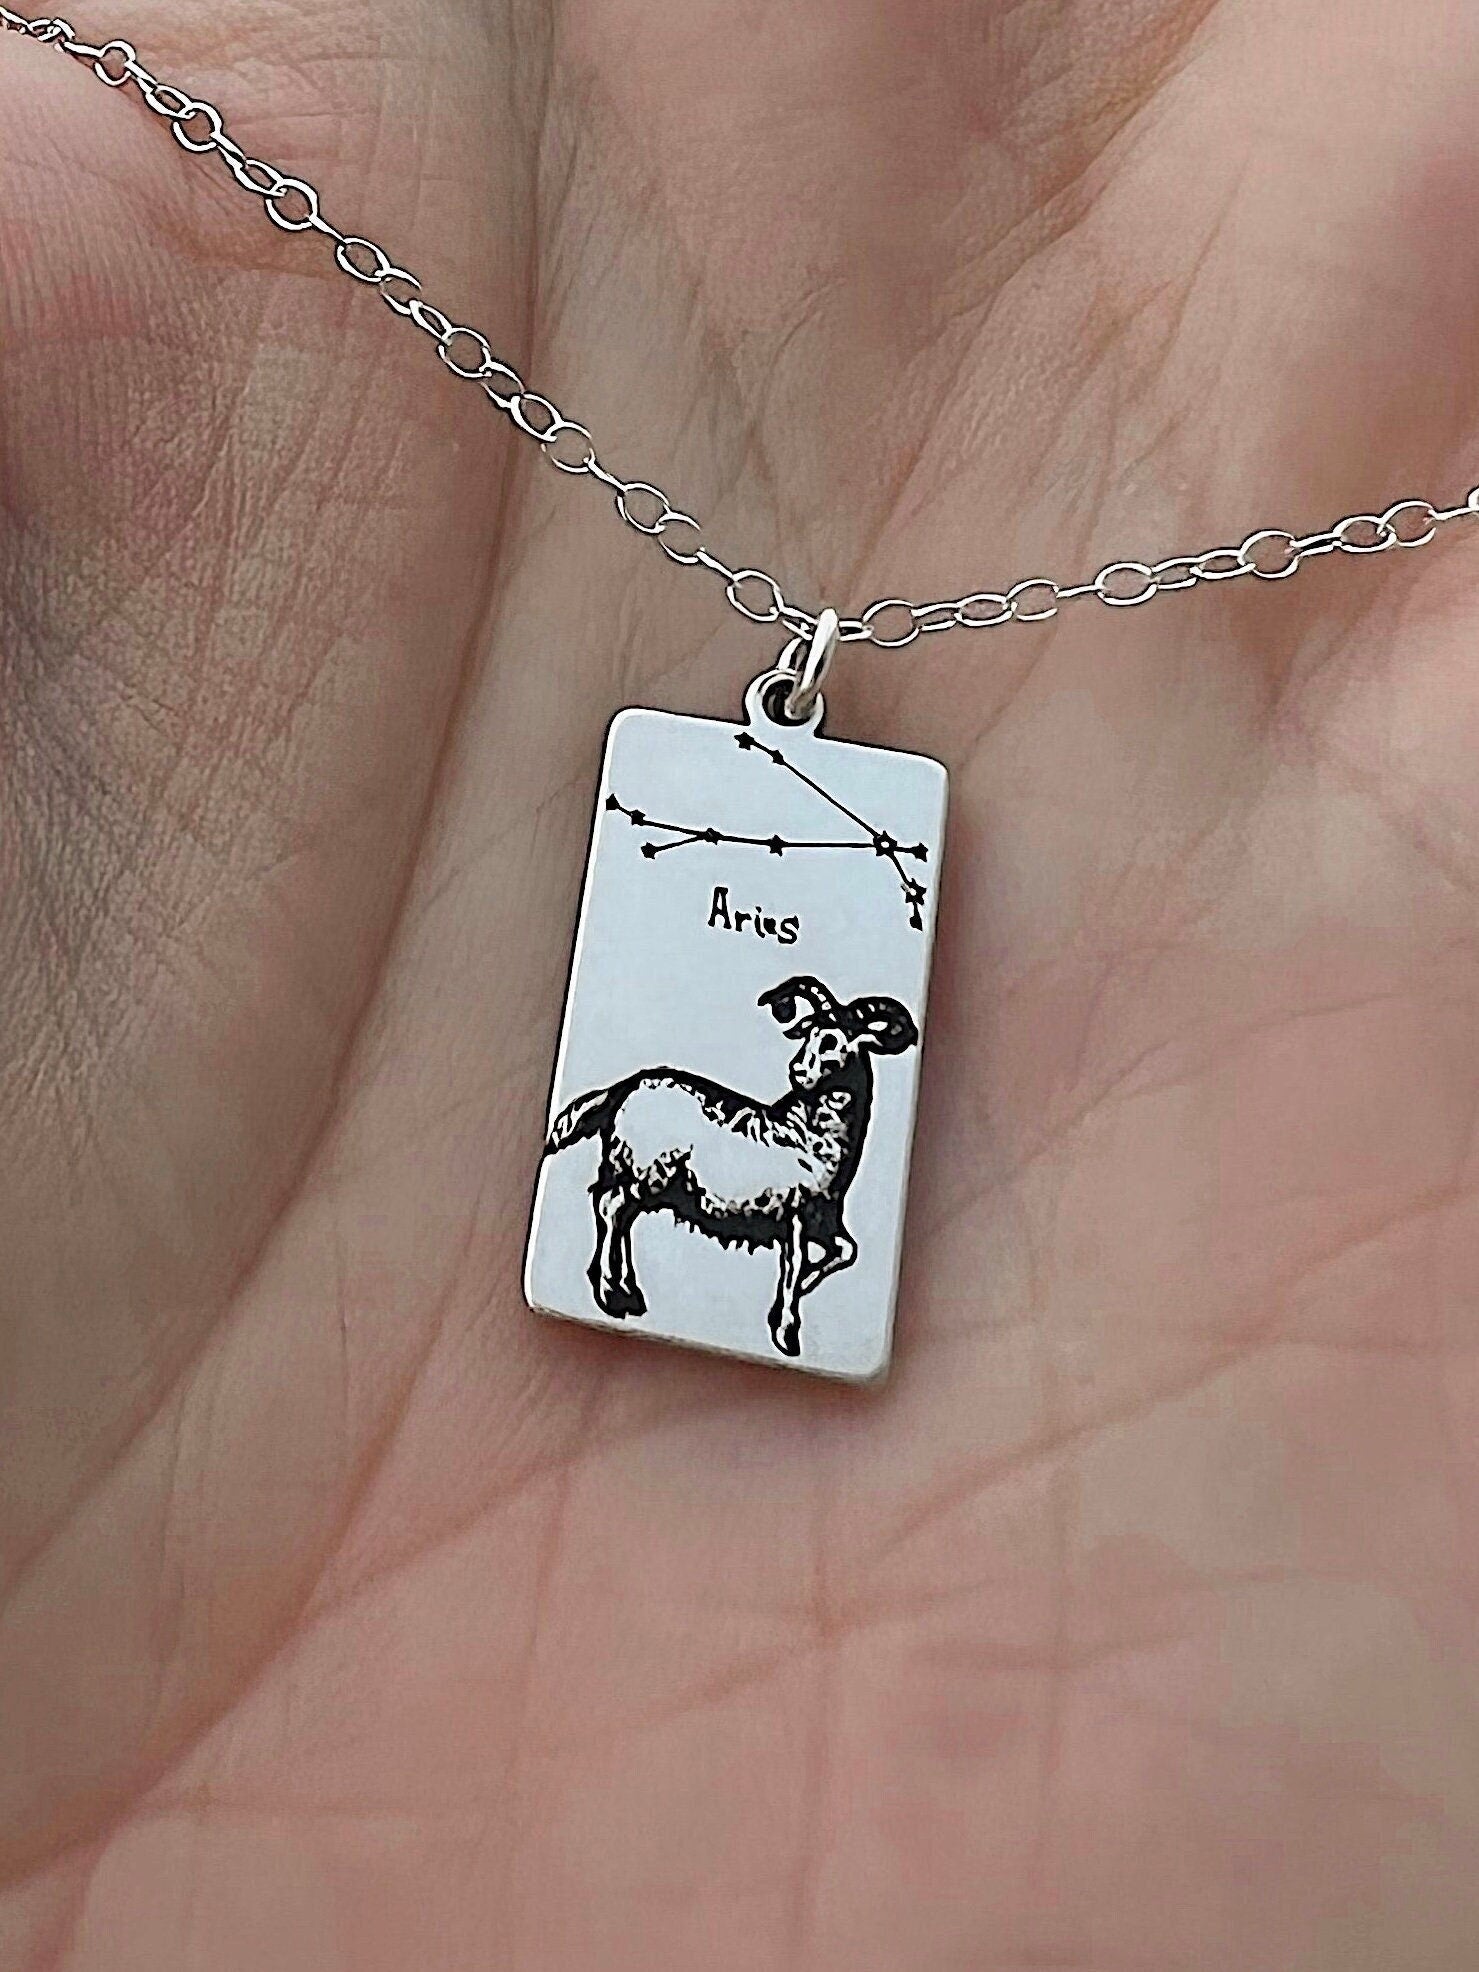 Aries Zodiac Sign Necklace - Sterling Silver